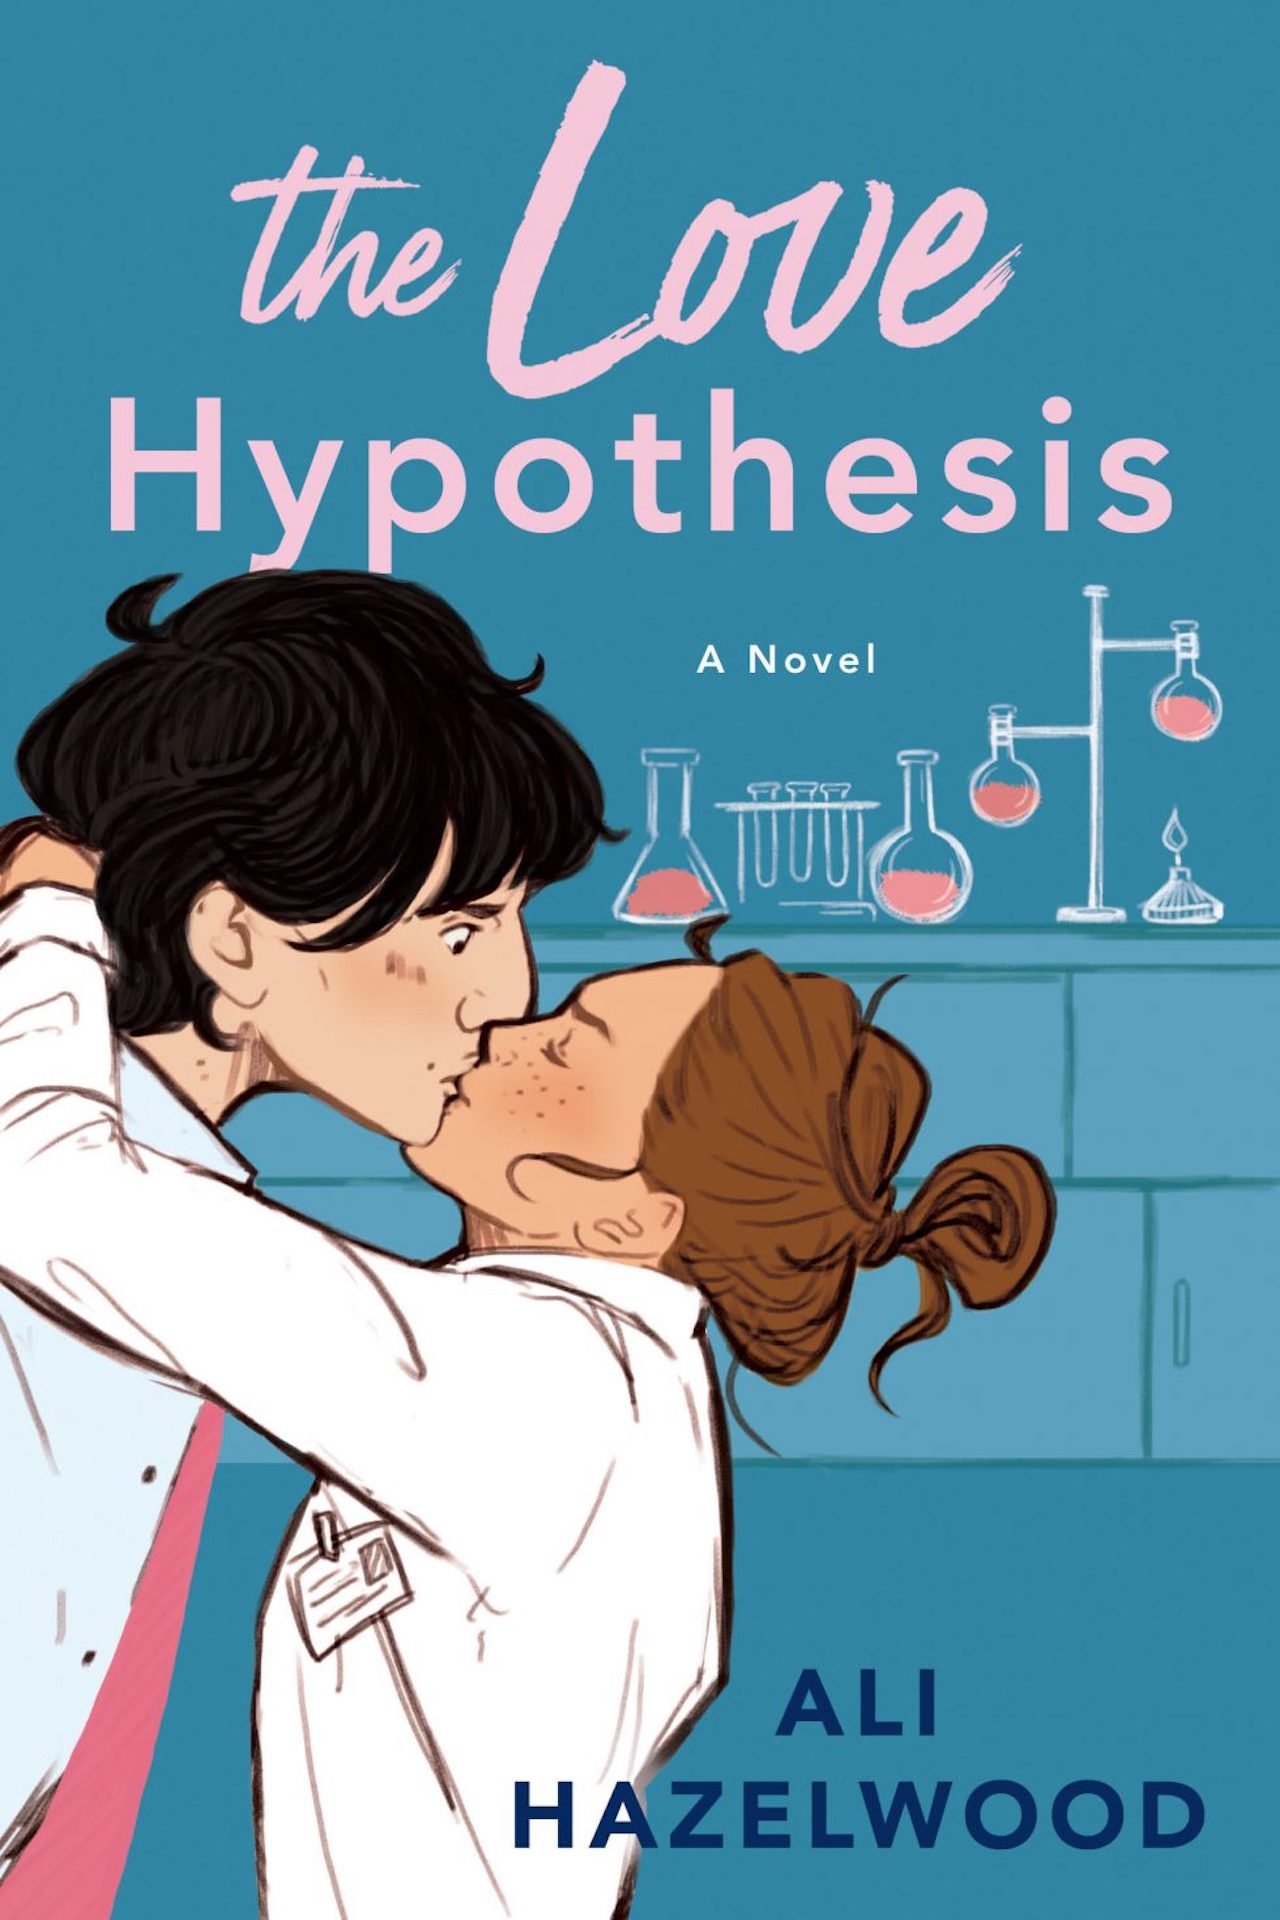 The Love Hypothesis by Ali Hazelwood 2021 book based on fanfiction by Reylo